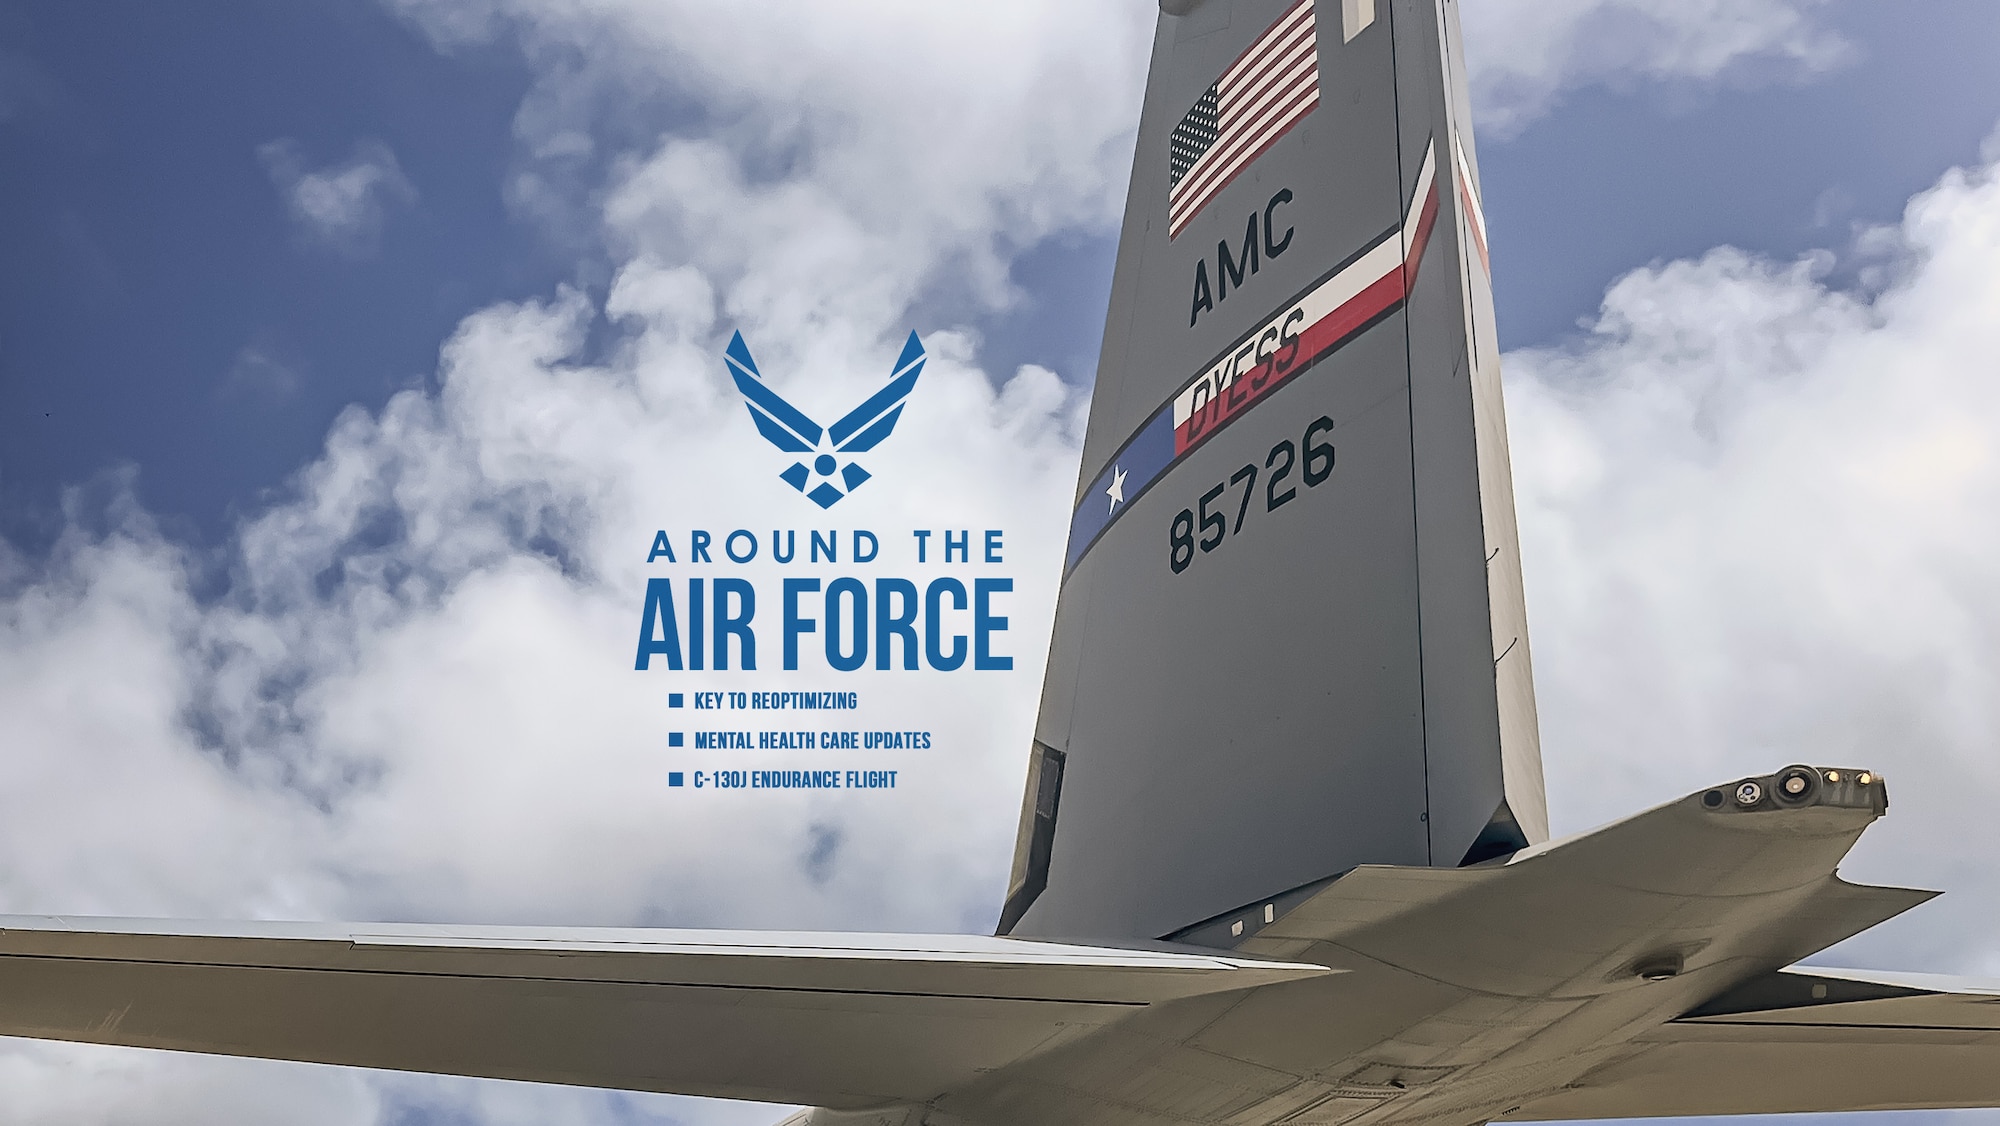 Around the Air Force: Key to Reoptimizing, Mental Health Care Updates, C-130J Endurance Fight